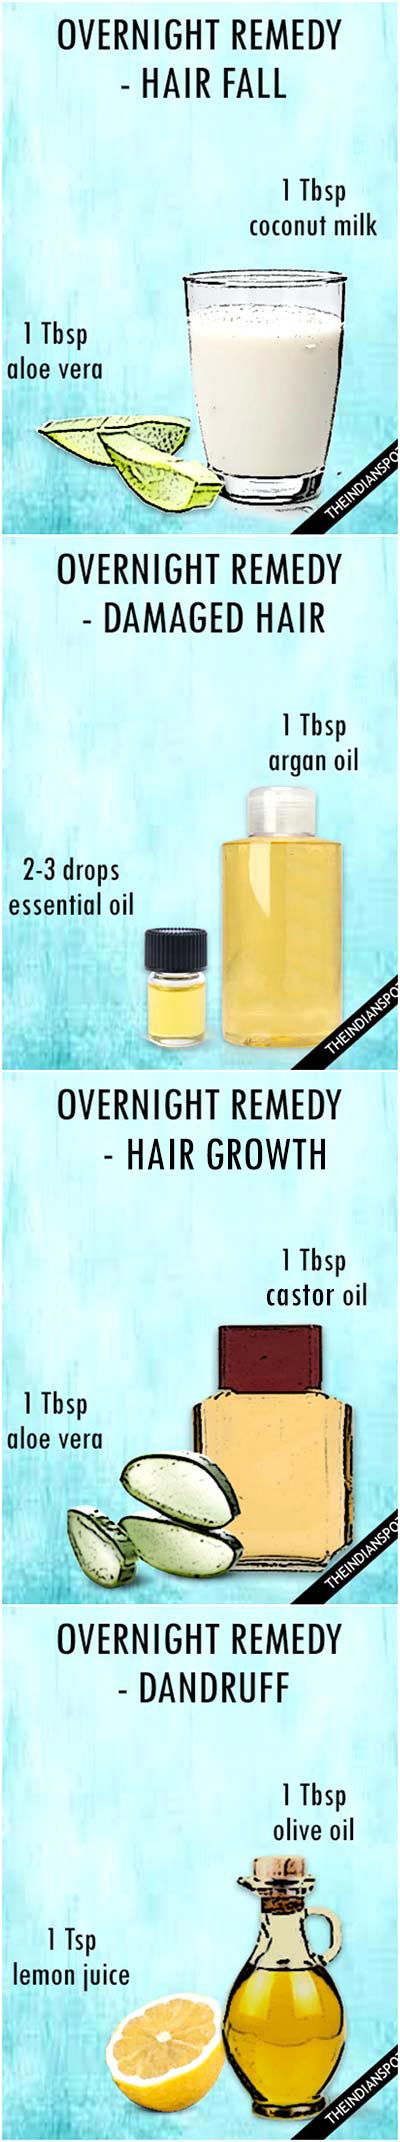 Treat hair problems overnight with natural remedies